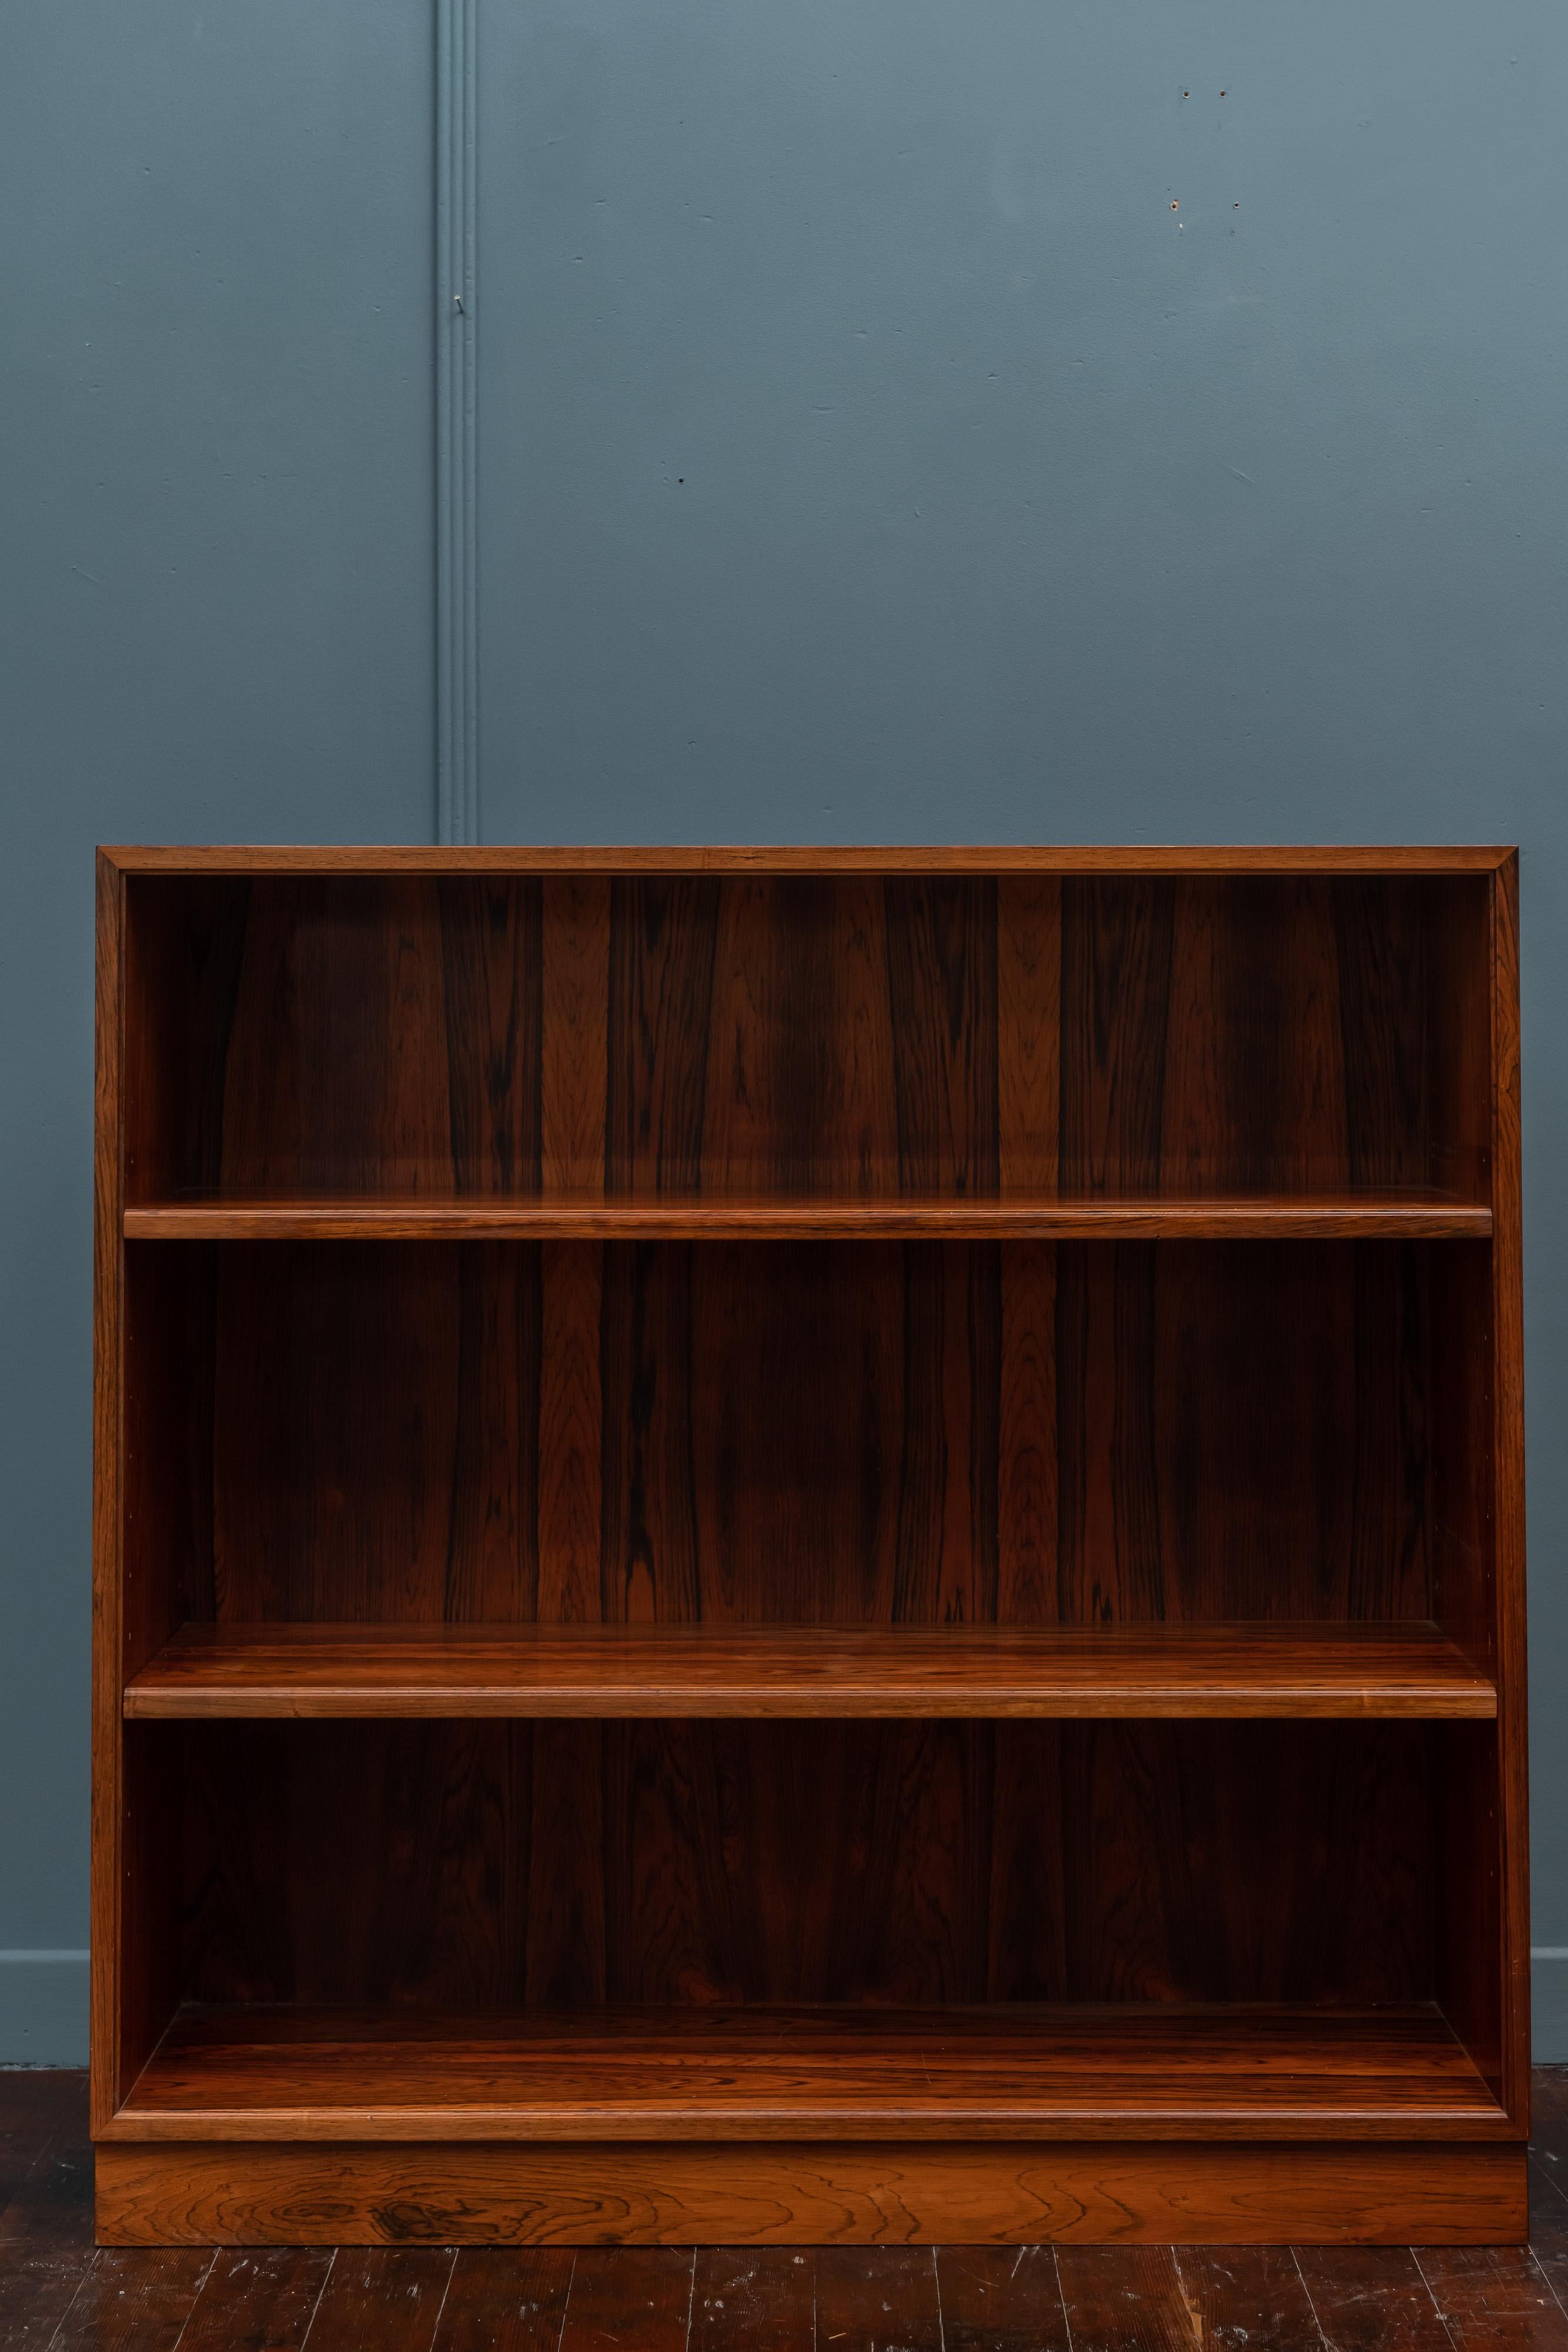 Scandinavian modern rosewood bookcase with three adjustable shelves by Willy Beck, Denmark. Made with book dramatic book matched veneer and attention to detail with a finished back, very good original condition, labeled.